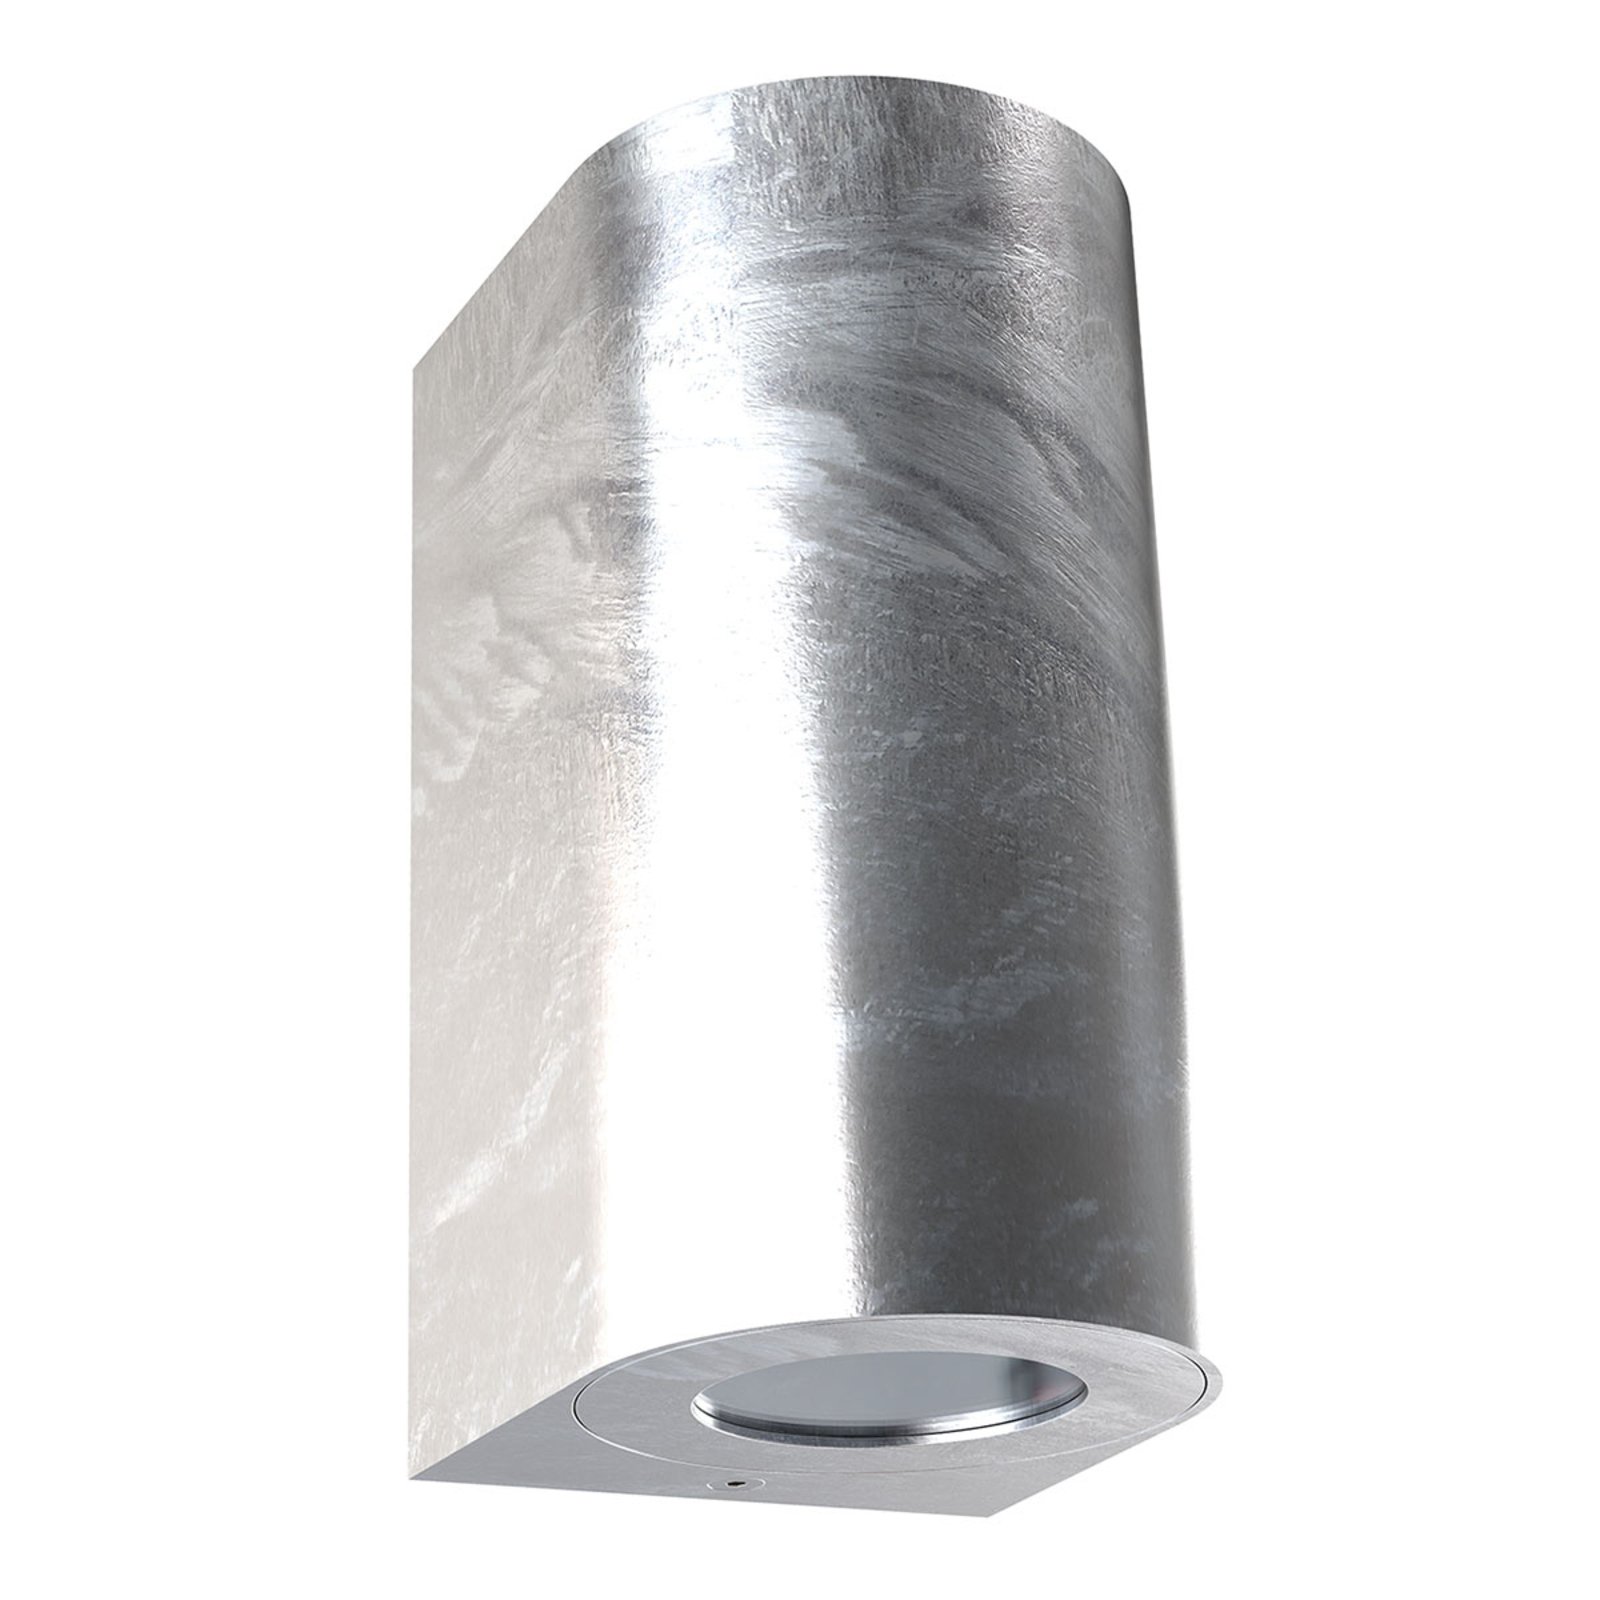 Canto Maxi 2 outdoor wall light, galvanised